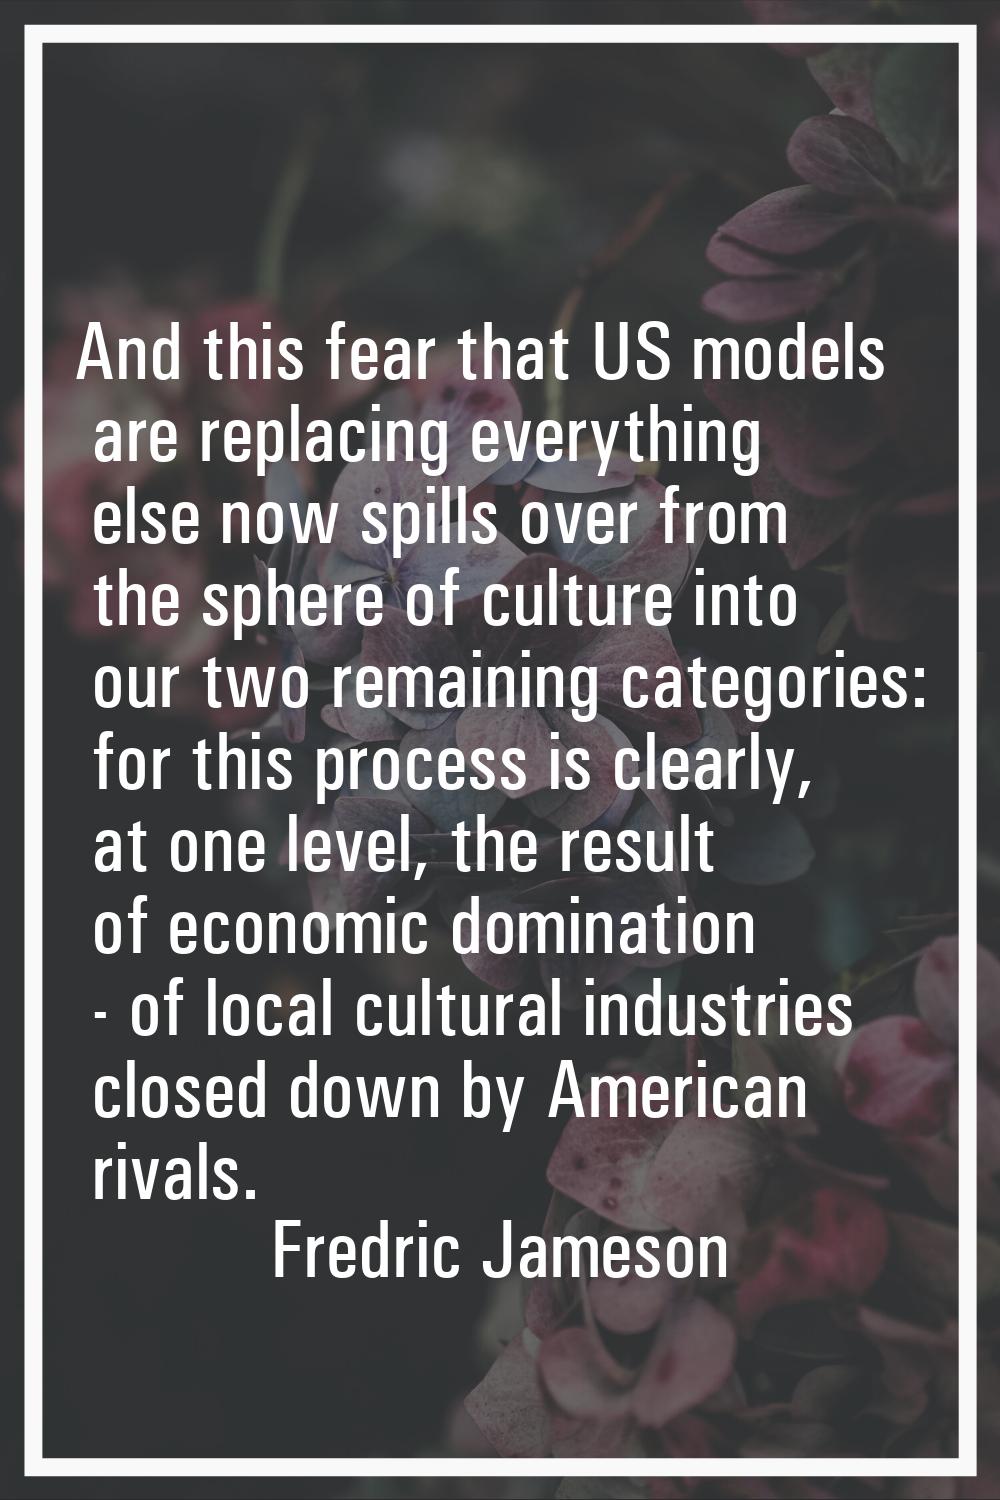 And this fear that US models are replacing everything else now spills over from the sphere of cultu